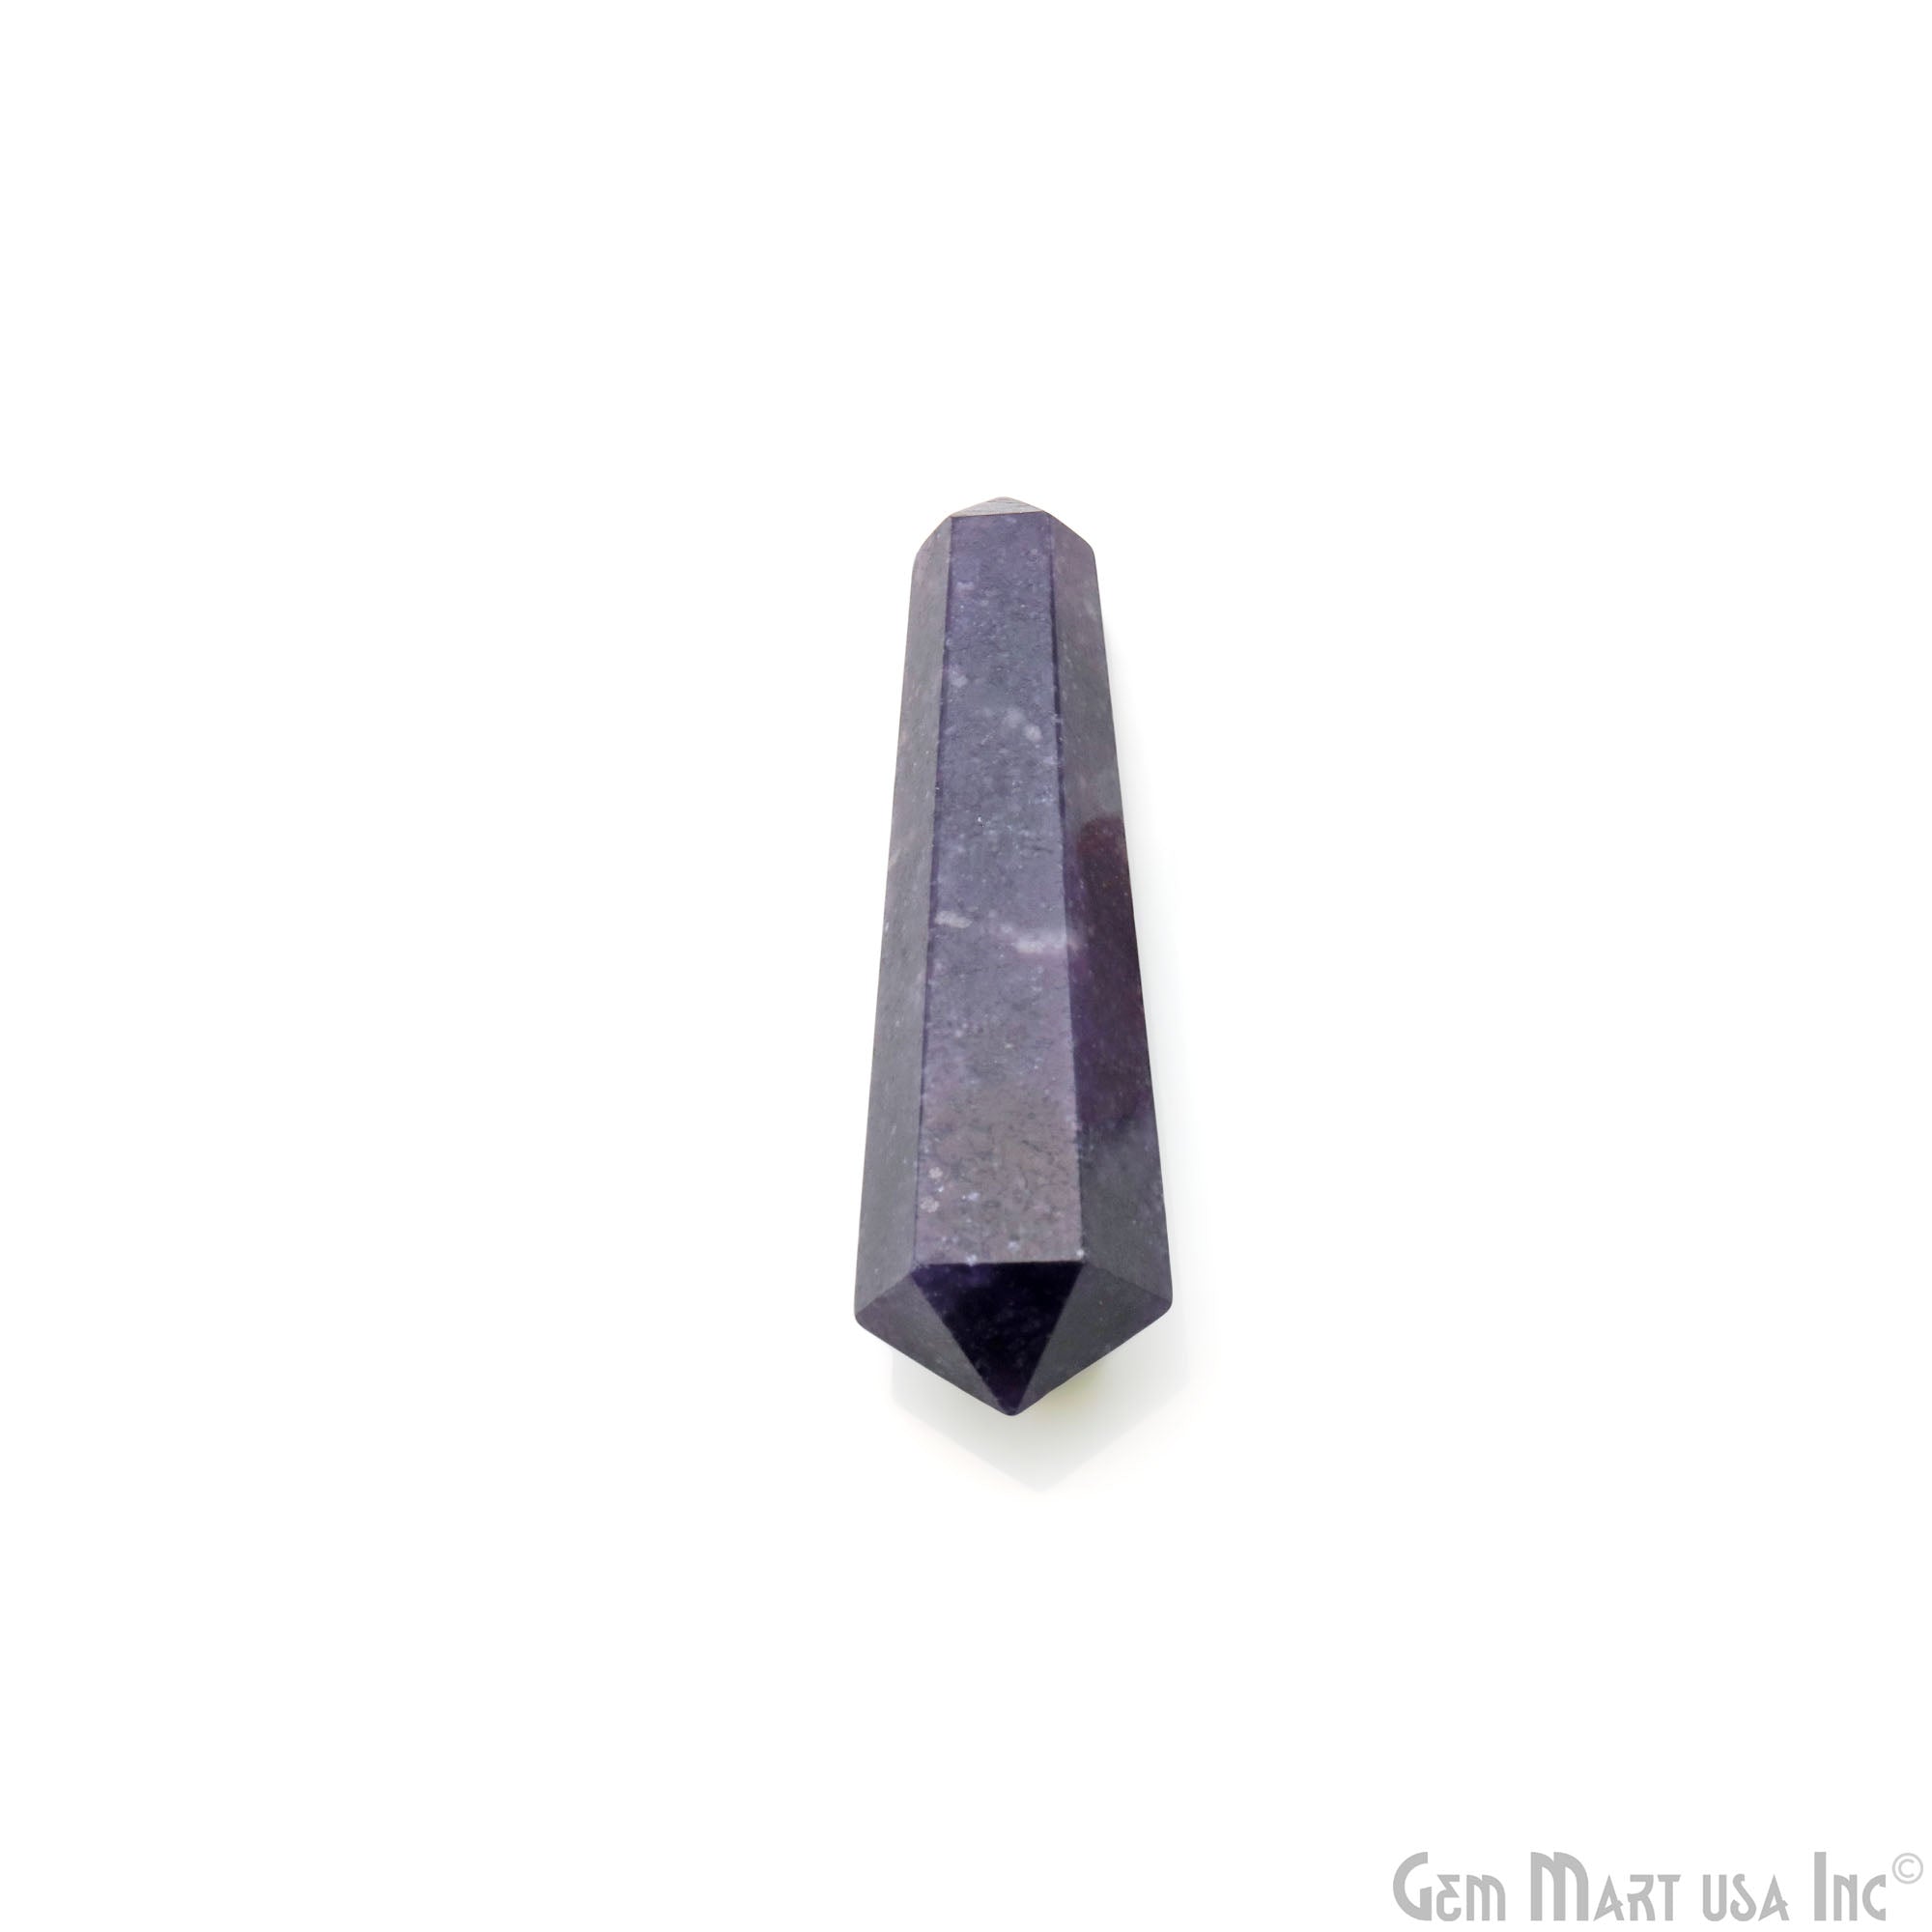 Terminated Gemstone Healing Crystal 54x16mm Pencil Point Wand